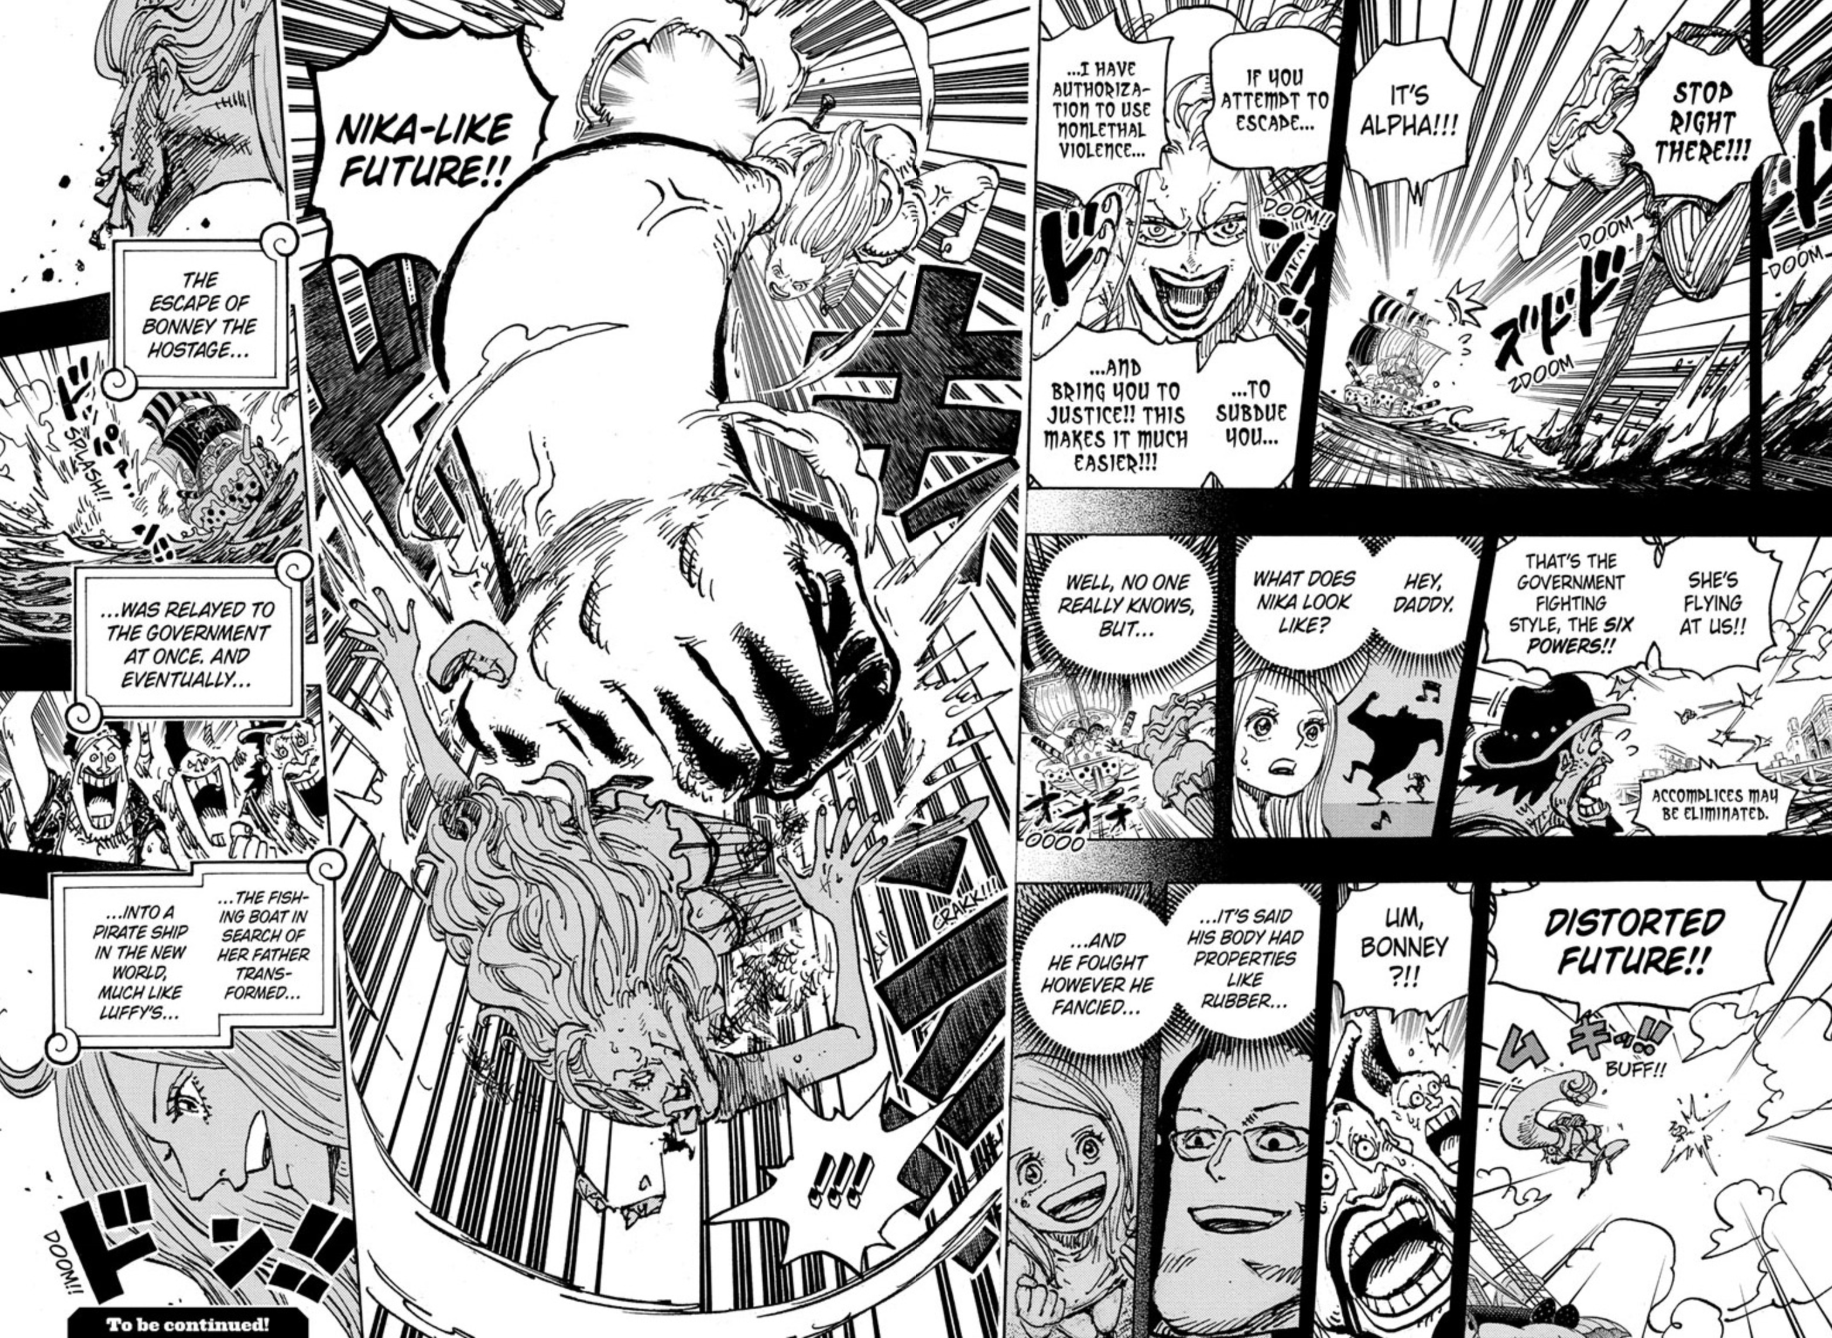 Jewelry Bonney uses Distorted Future to turn into Nika, knock out Alpha, and start her pirate voyage.